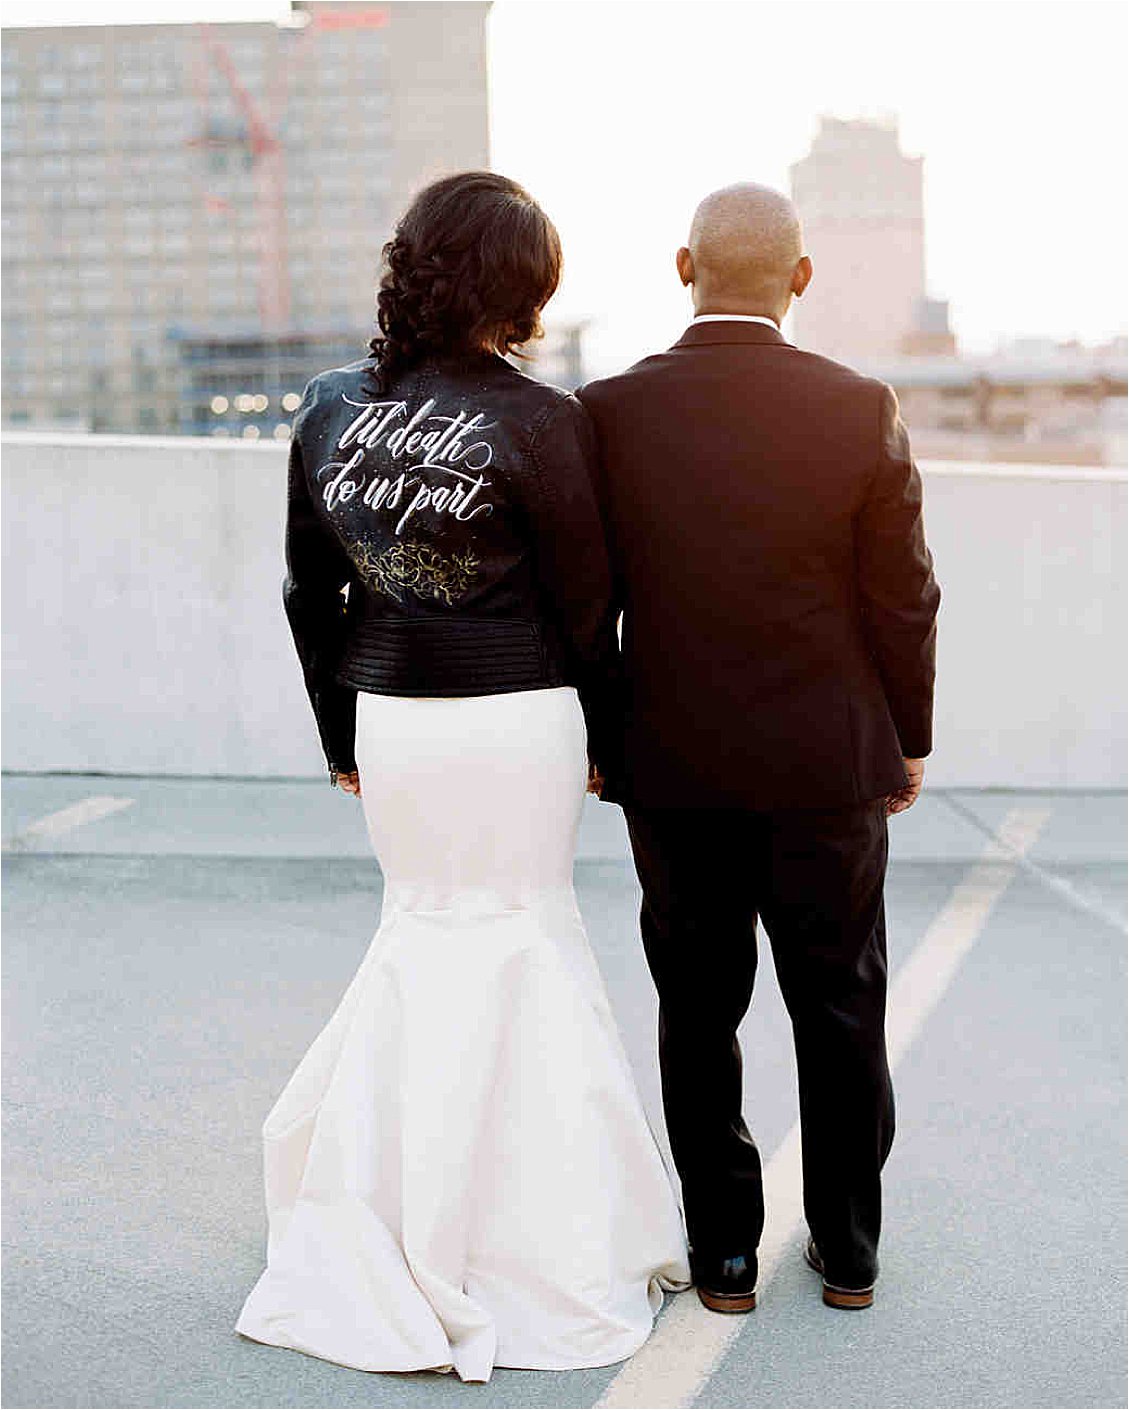 2019 Publications - A Year in Review with Florida and DC Film Wedding Photographer Renee Hollingshead as seen in Martha Stewart Weddings. Personalized Leather Jacket Til Death Do Us Part at Excelsior Lancaster